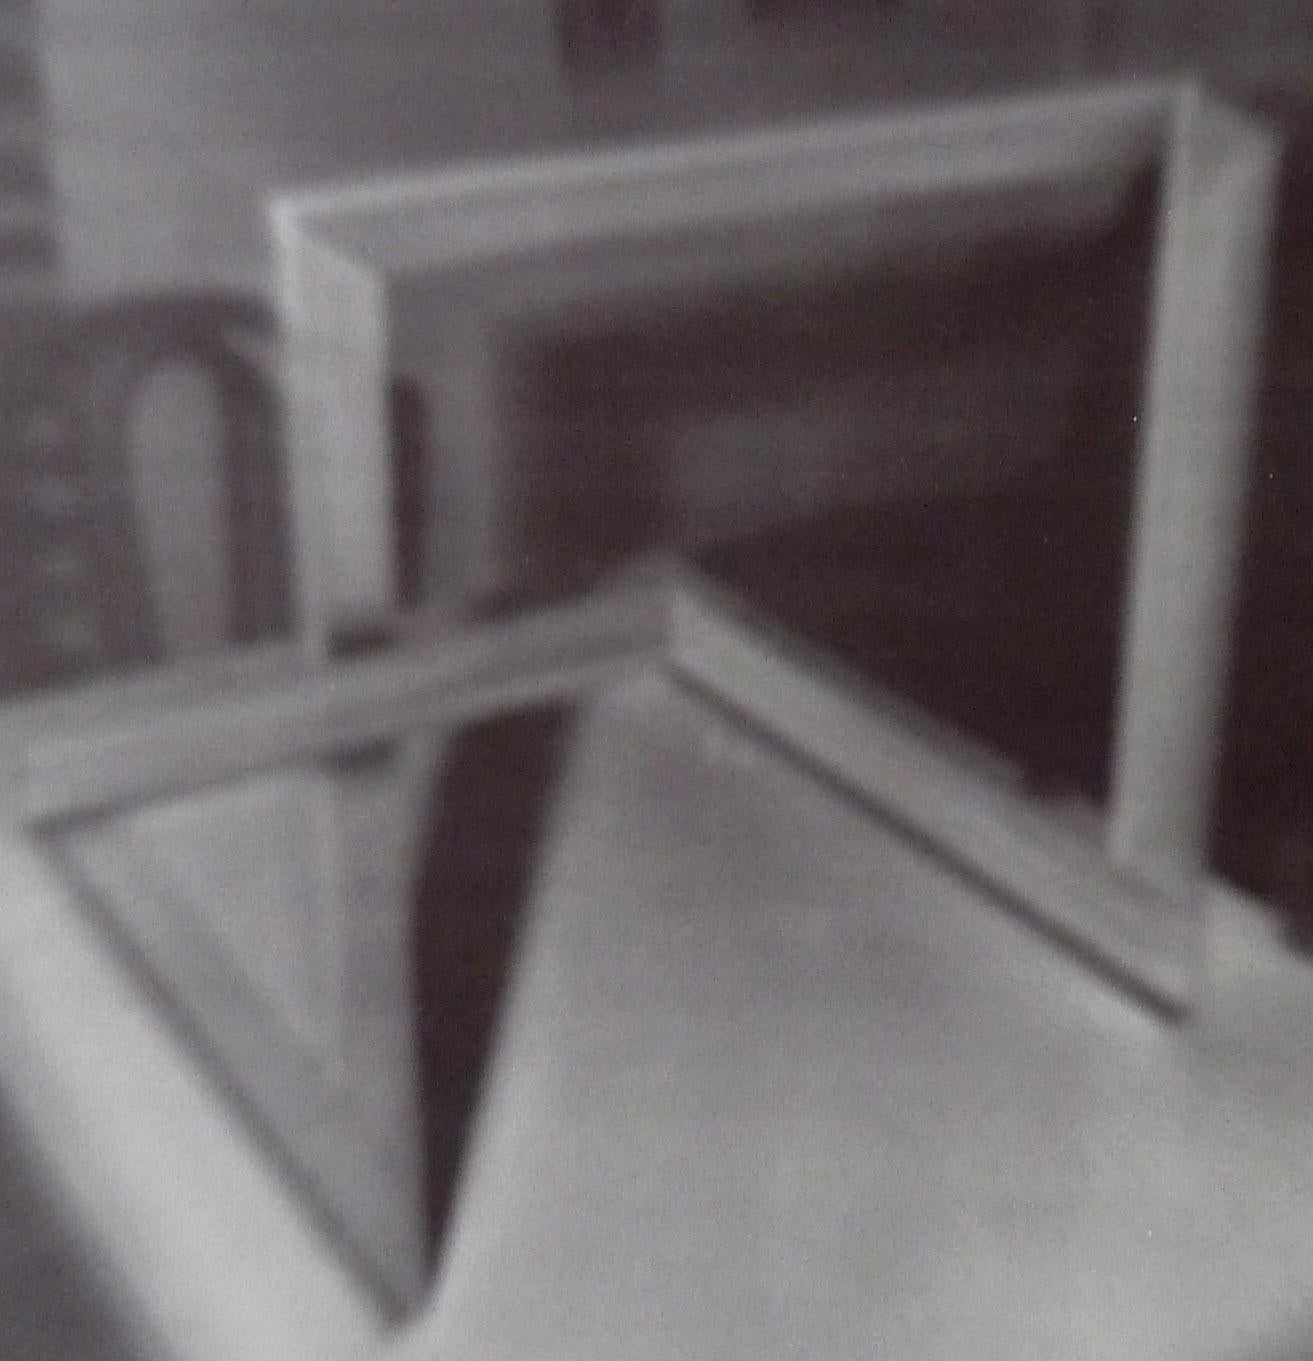 Object on a Table, from Nine Objects - German Realism - Realist Print by Gerhard Richter